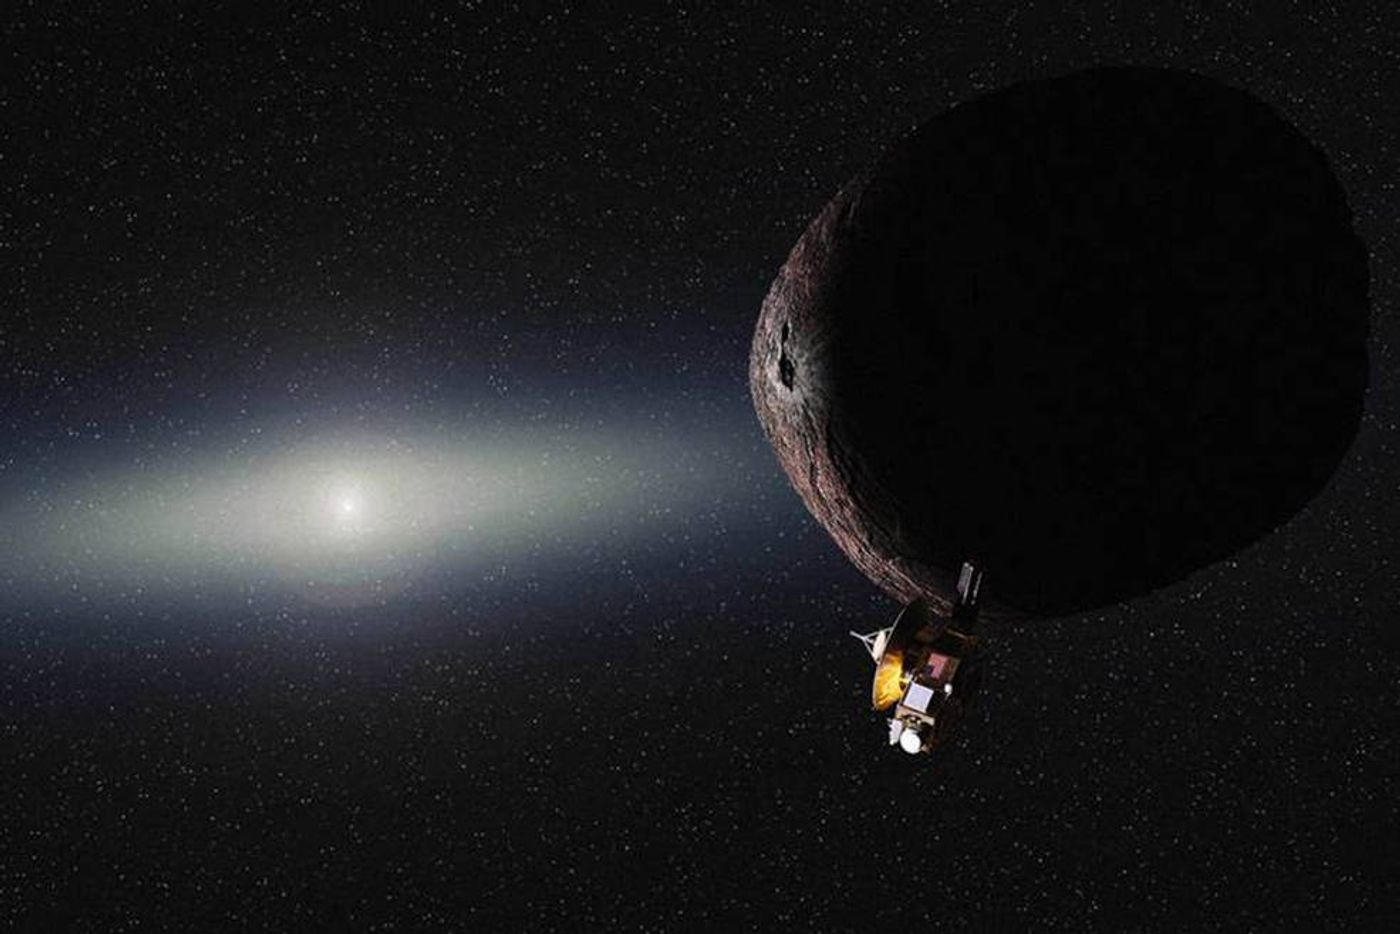 An artist's rendition of the New Horizons spacecraft flying past Ultima Thule.